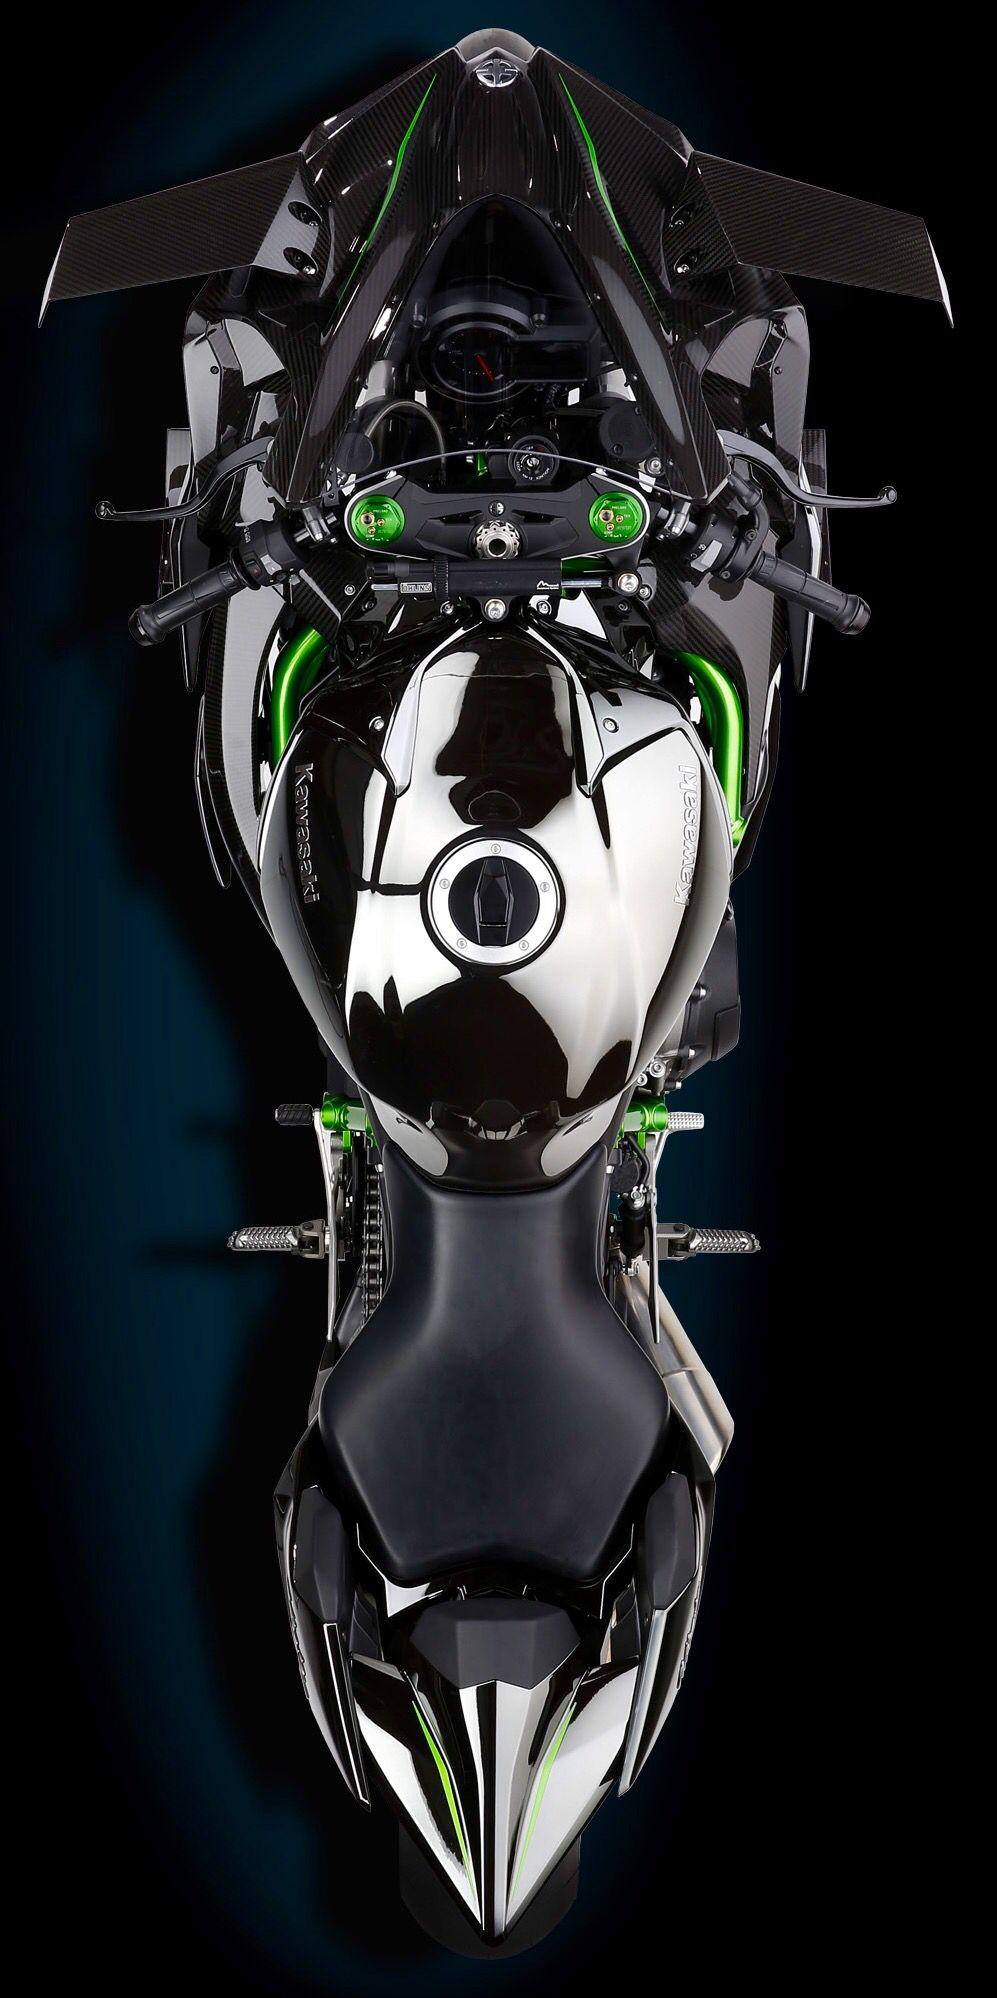 Kawasaki to unveil a road-legal version of the Ninja H2R at EICMA - BikeWale